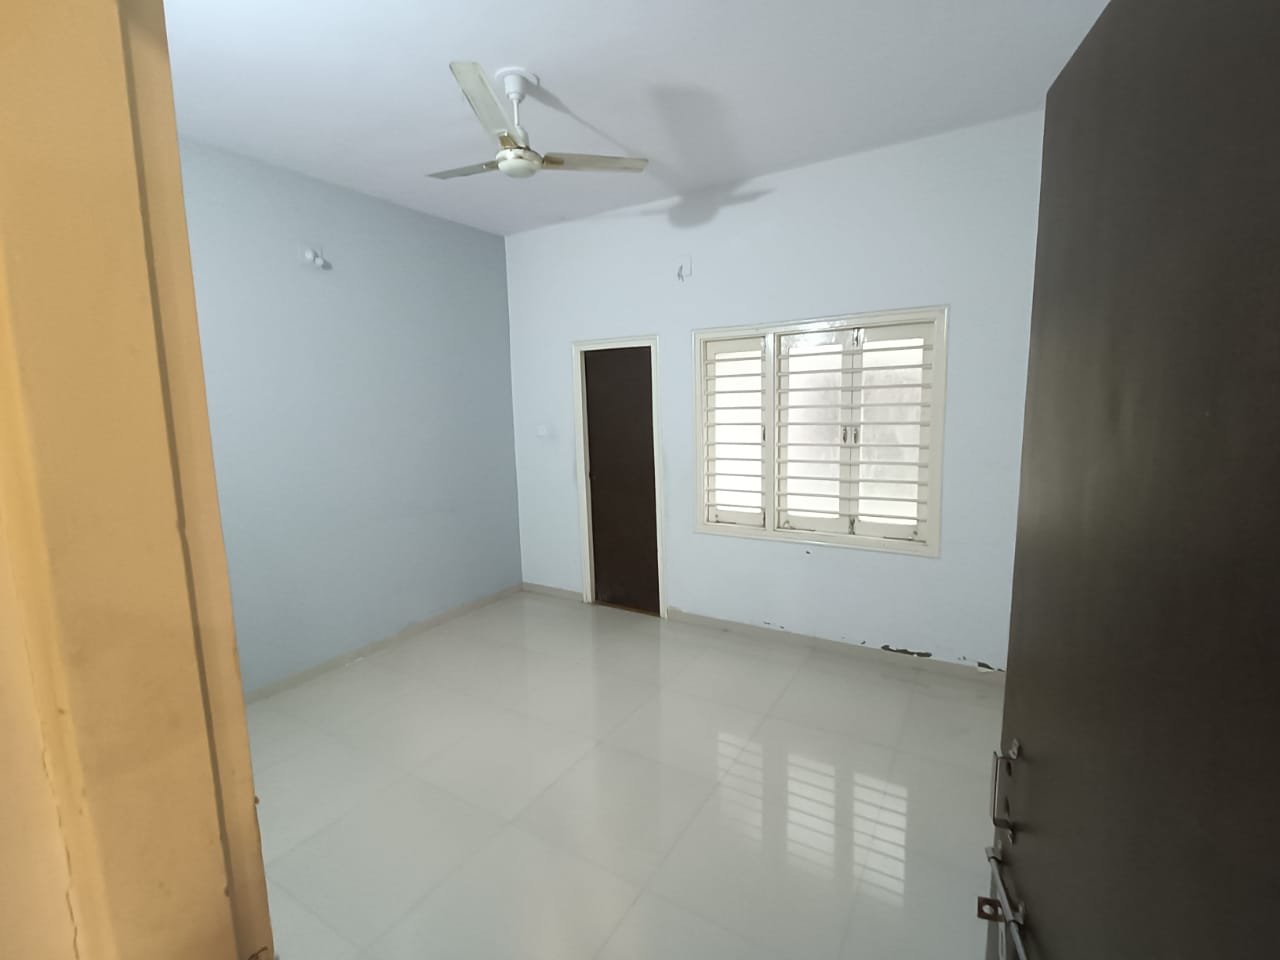 3 BHK Residential House for sale in  Premium Location Of Anand, Gujrat